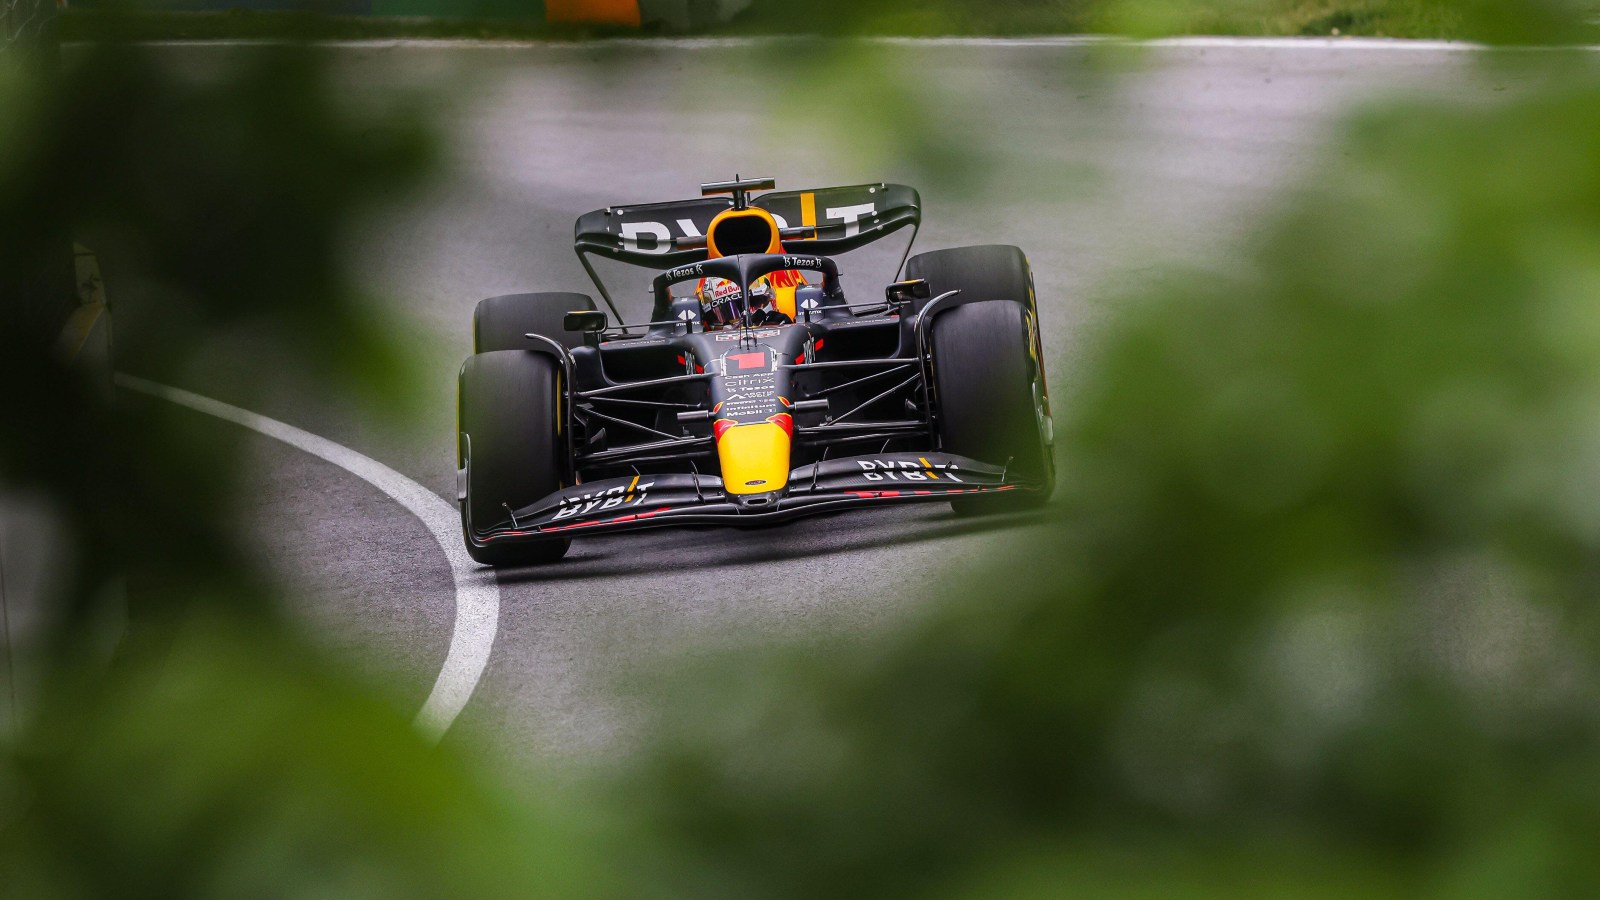 Max Verstappen driving during the practice session. Montreal, June 2022.